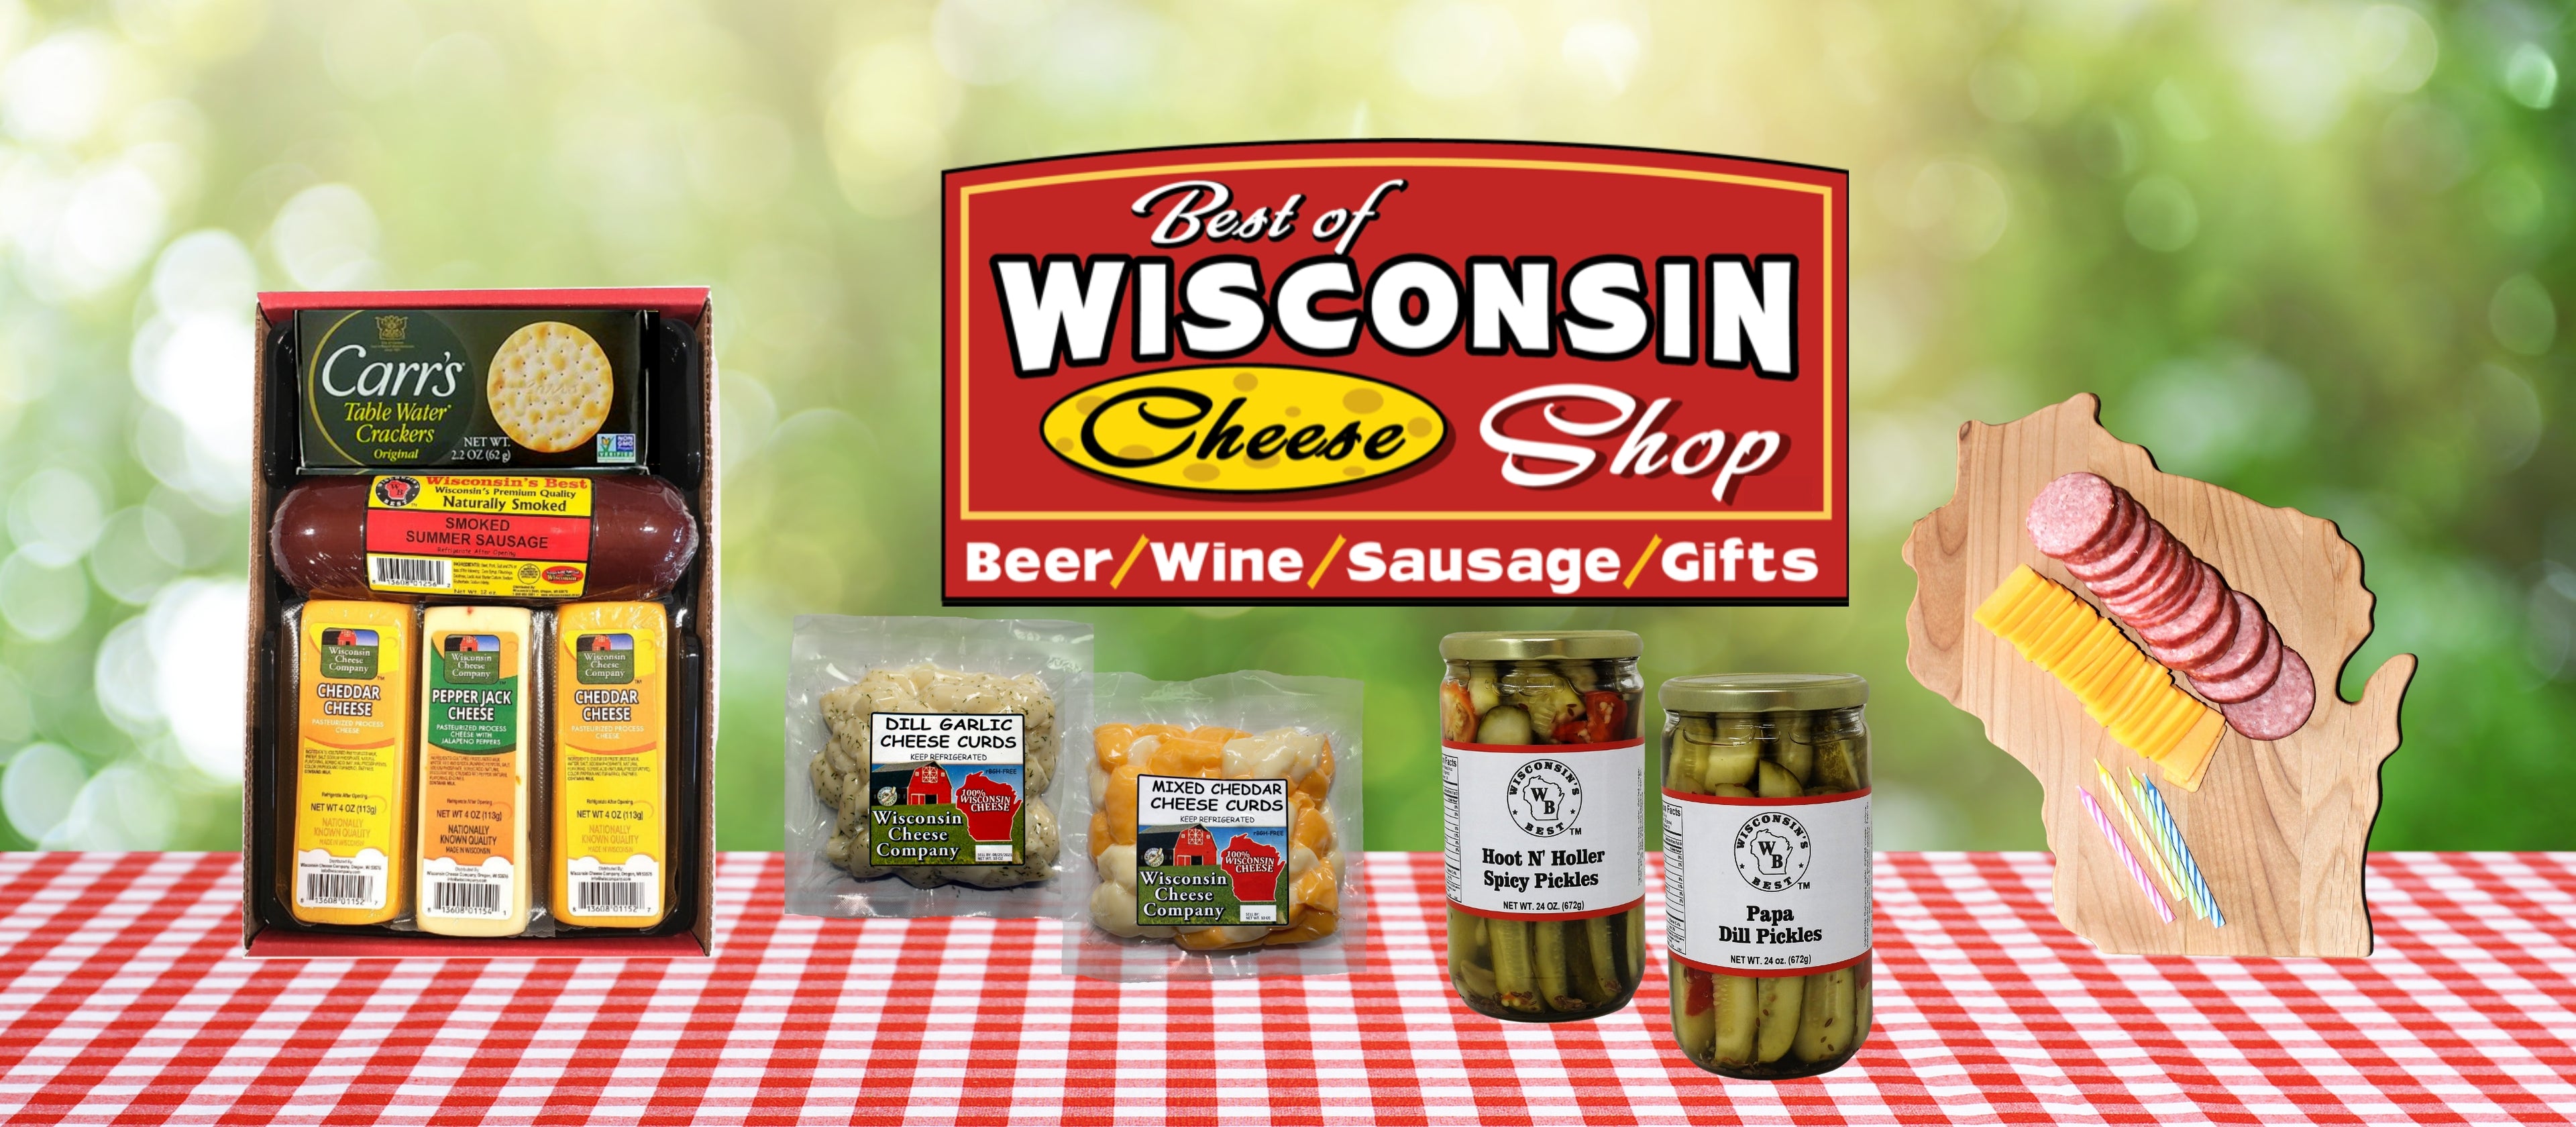 Large image of cheese and sausage gifts, cheese curds and pickles.